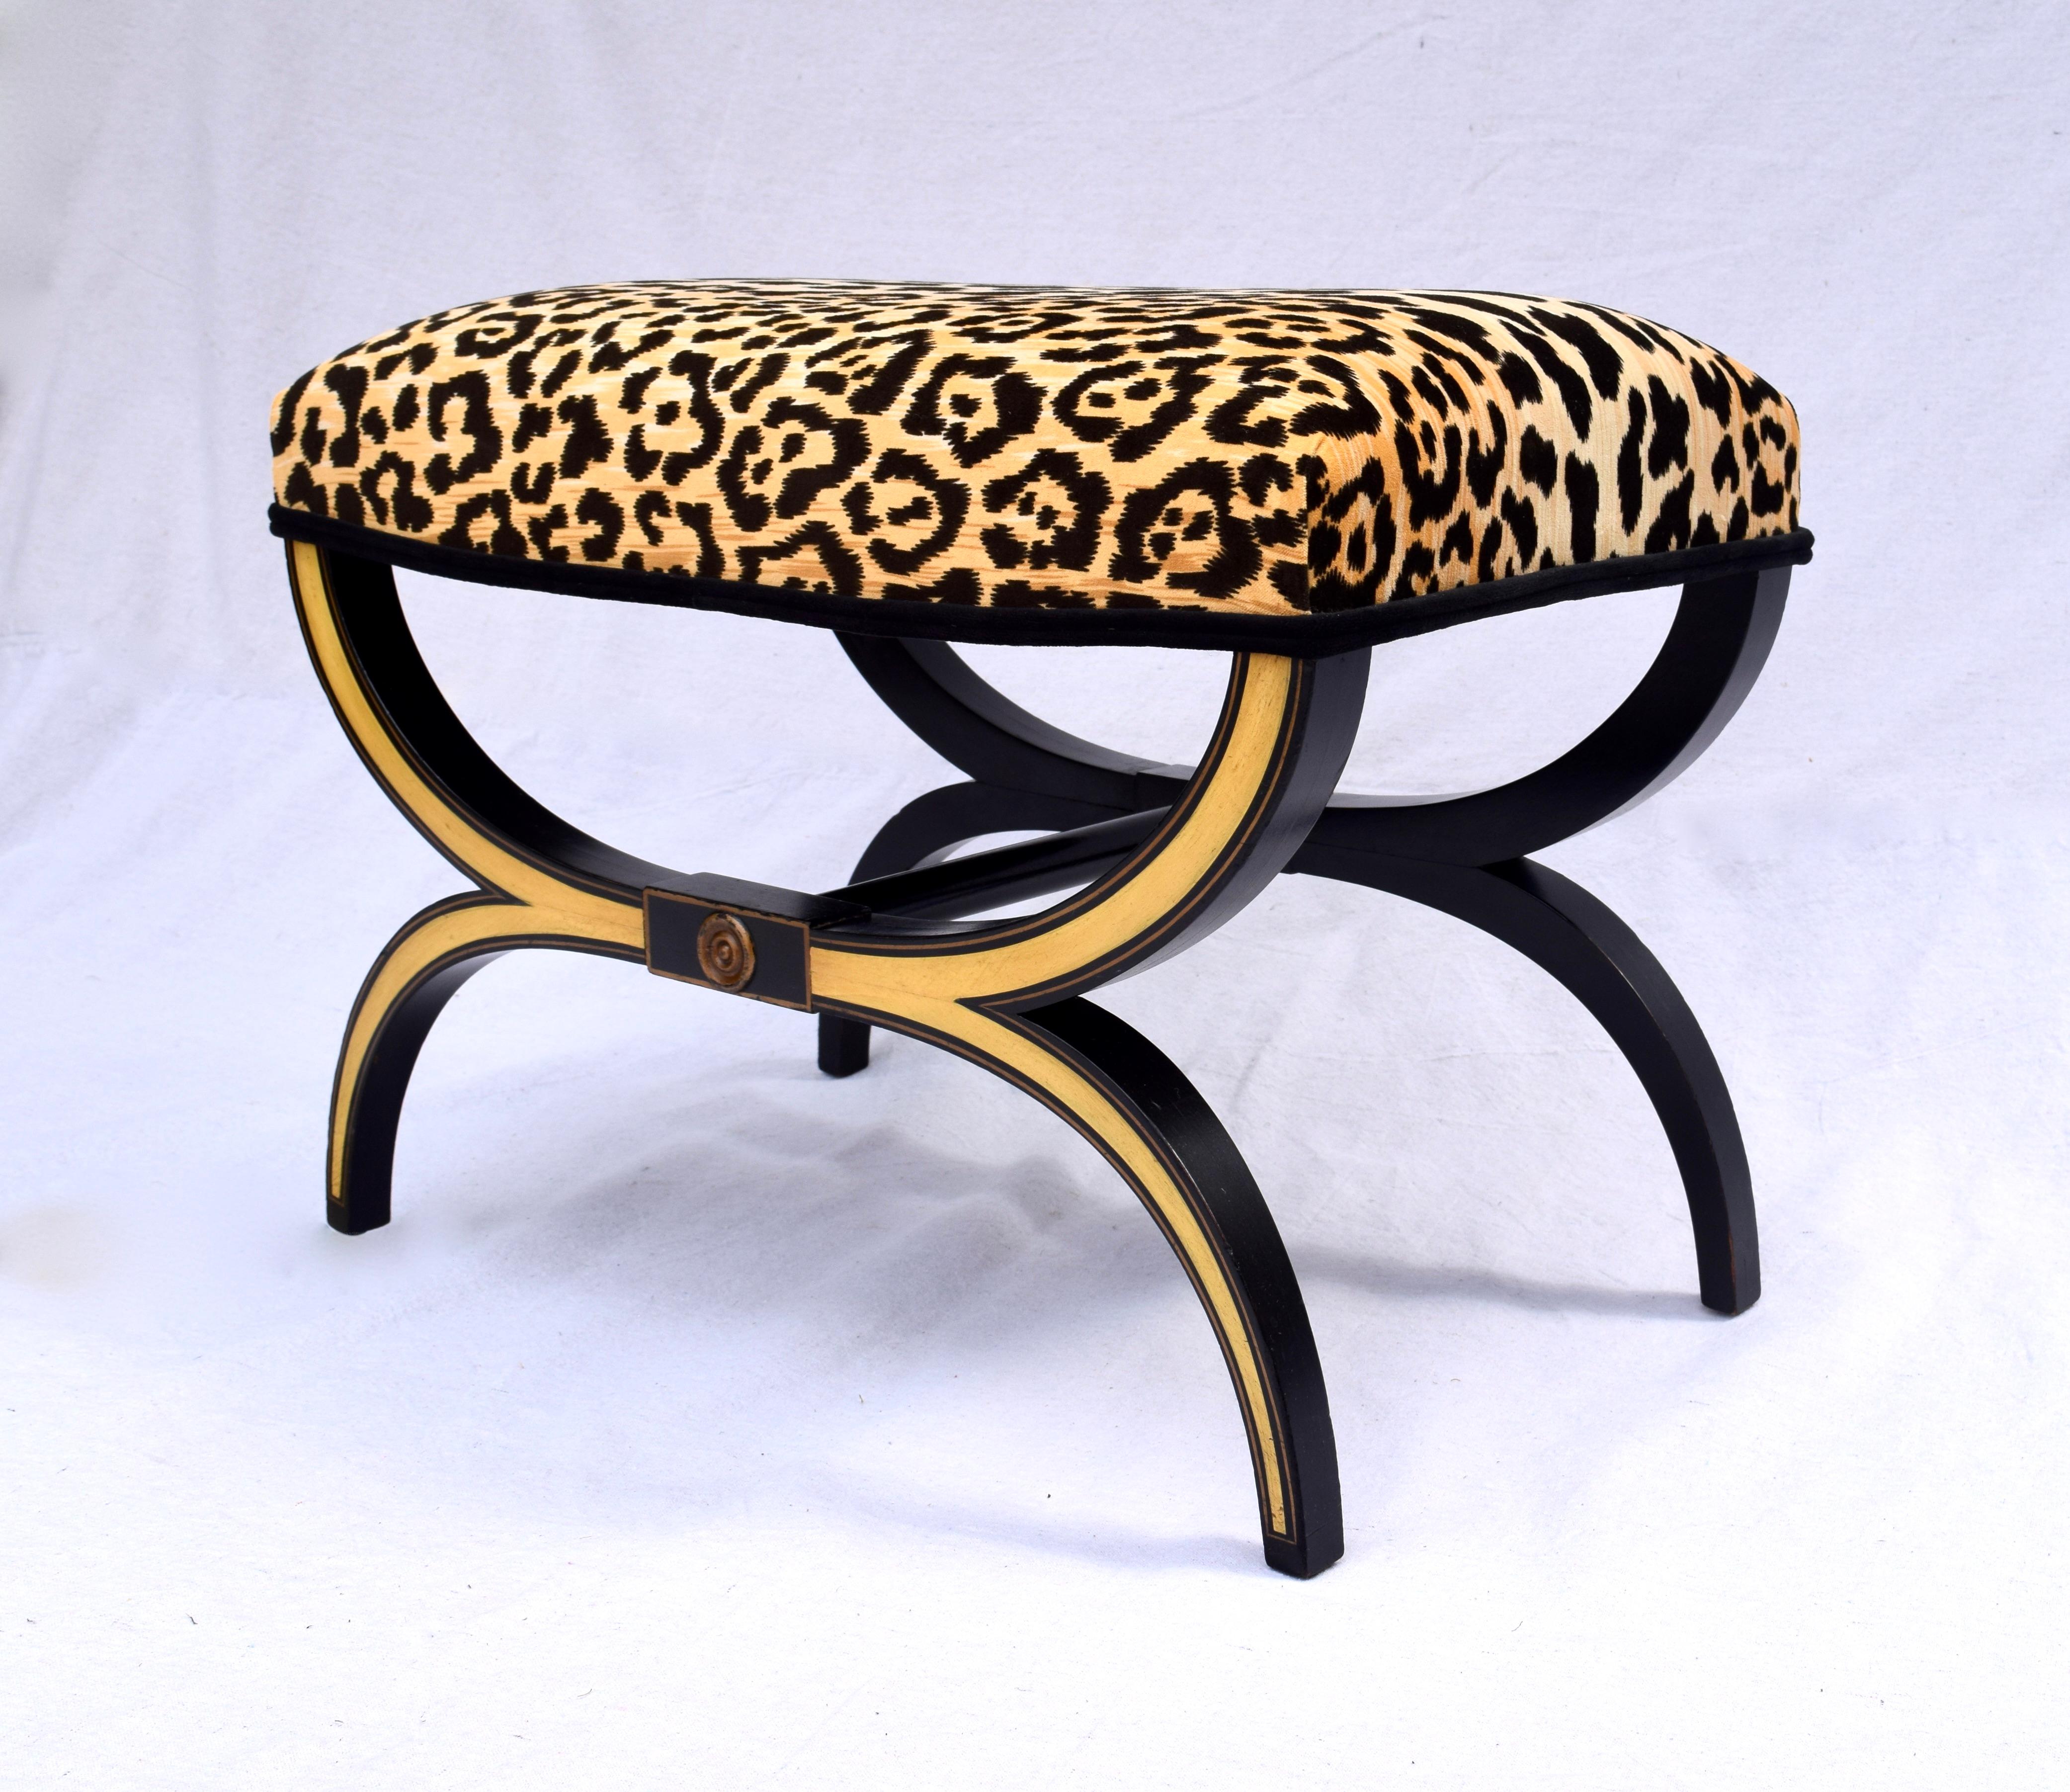 Neoclassical style Curule bench, stool or cocktail ottoman newly upholstered in leopard velvet. Original finish fully detailed and in excellent vintage condition.